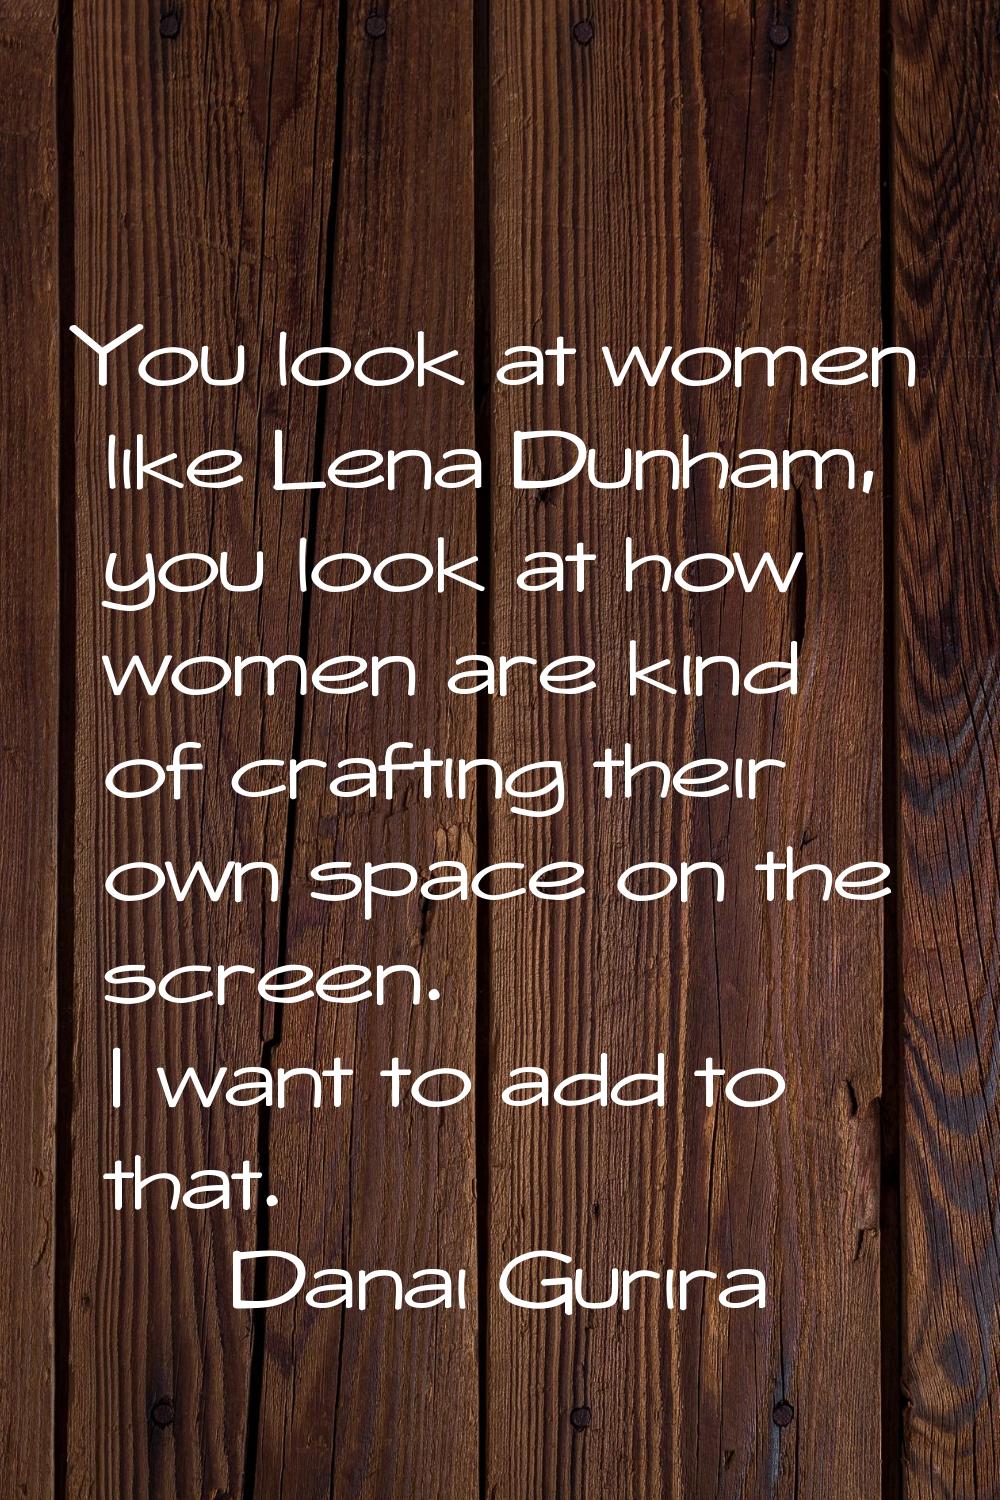 You look at women like Lena Dunham, you look at how women are kind of crafting their own space on t